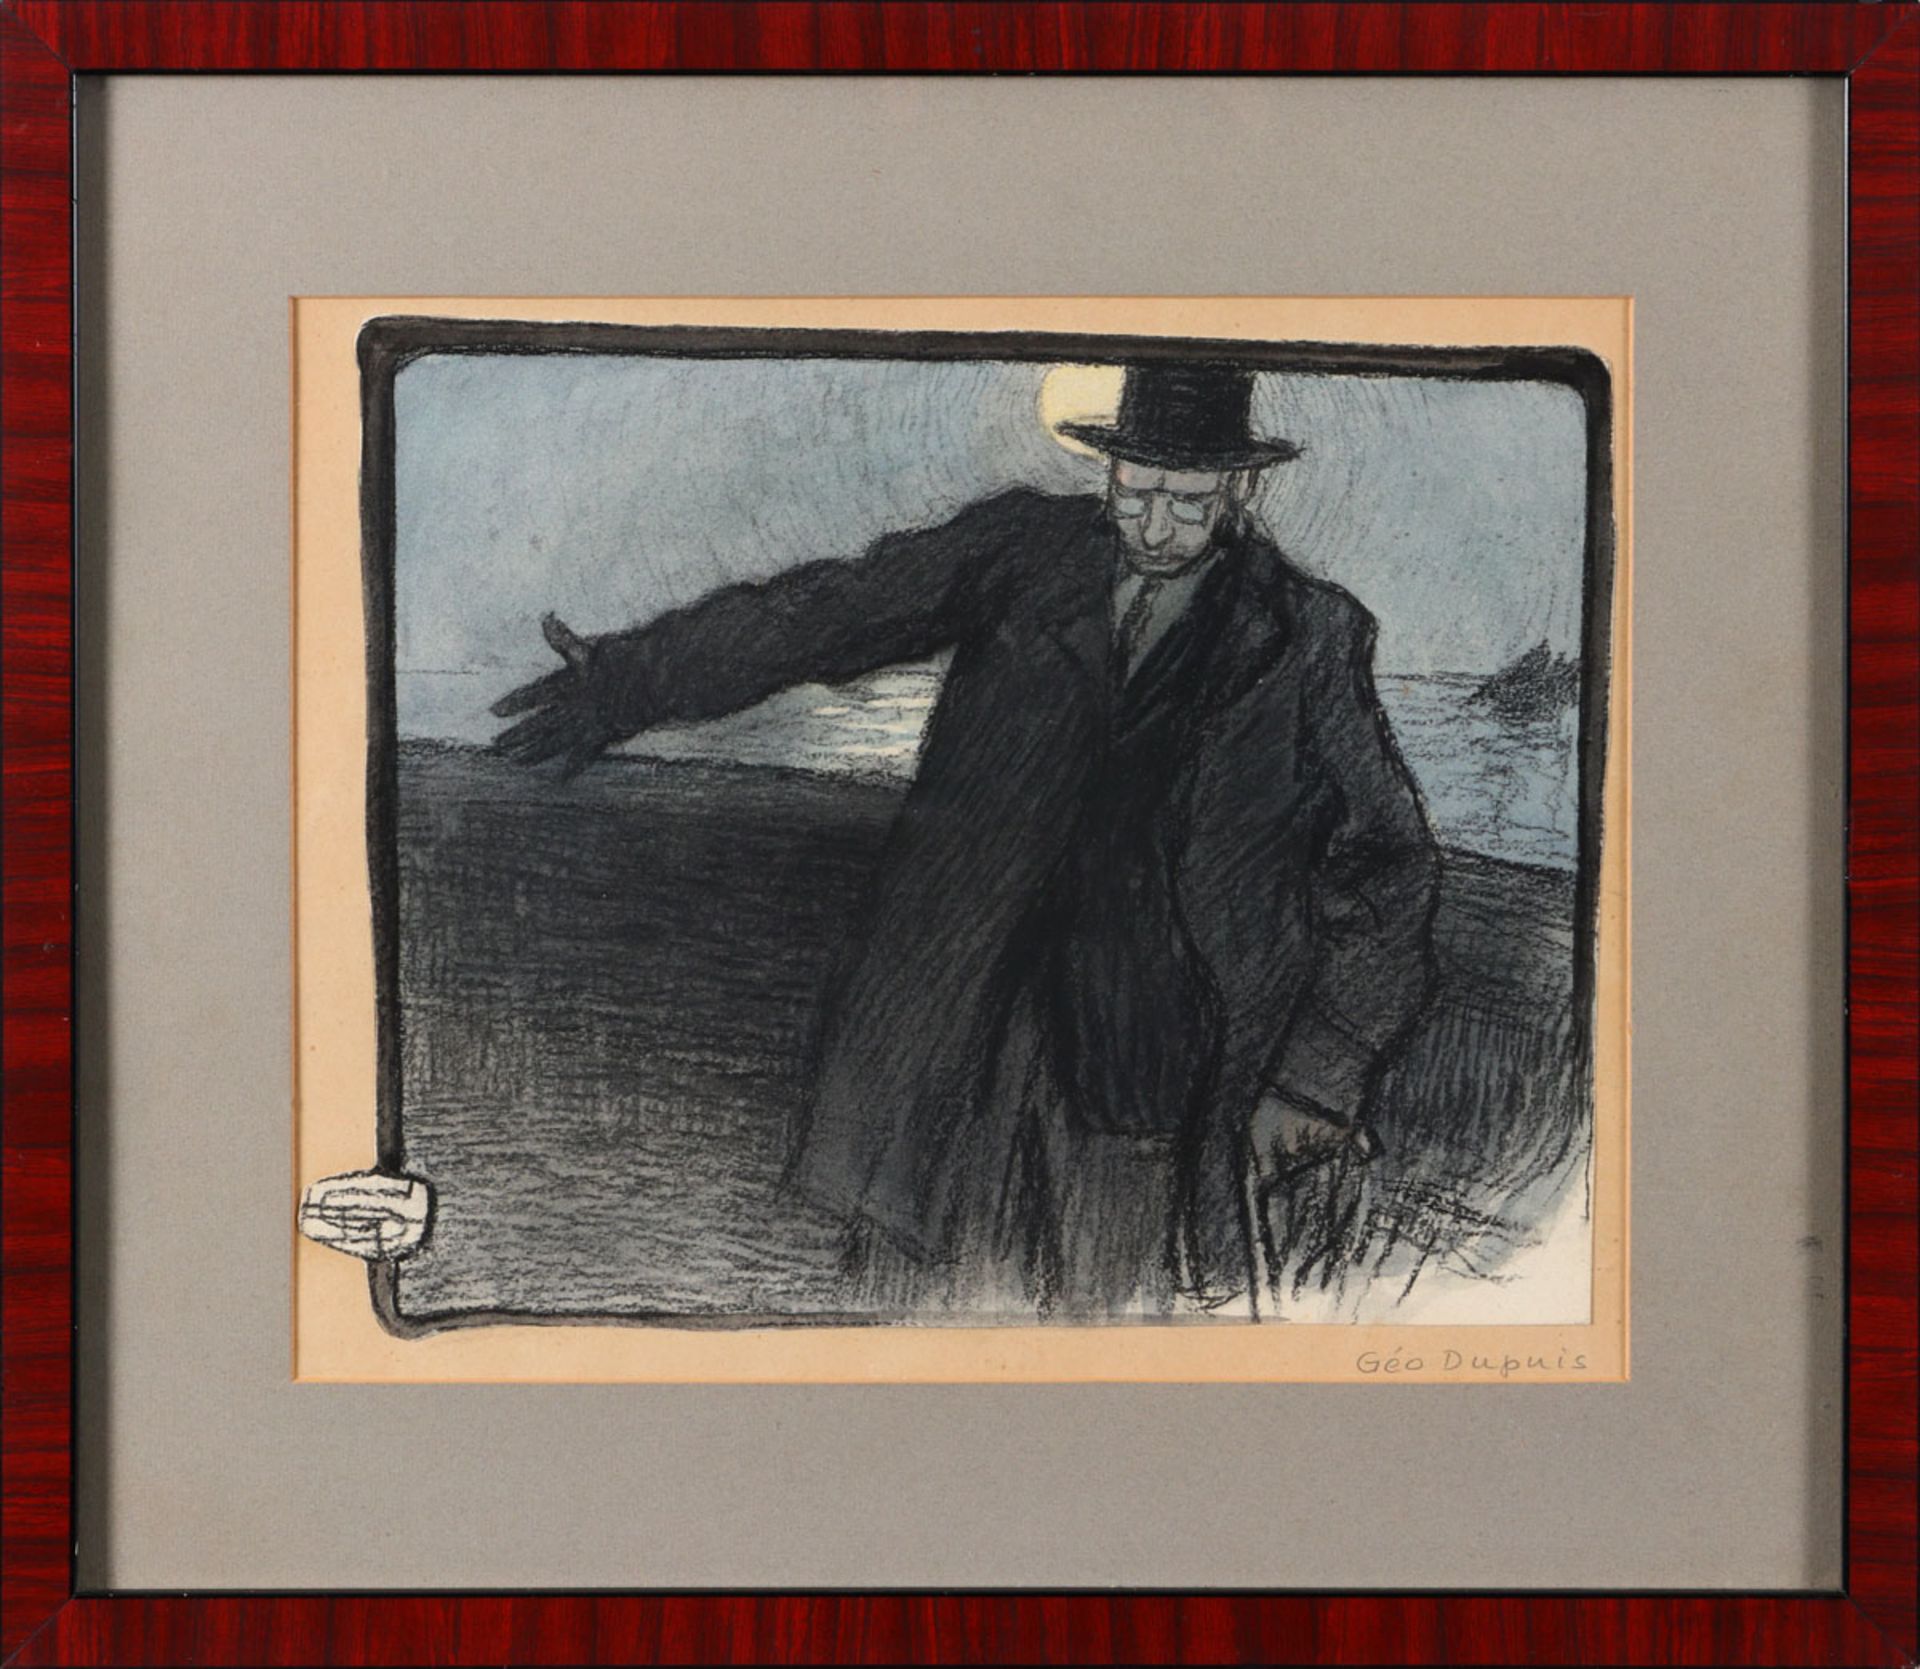 GÉO DUPUIS (1875-1932), MAN WALKING IN THE MOONLIGHT Mixed media on paper. Signed with monogram.